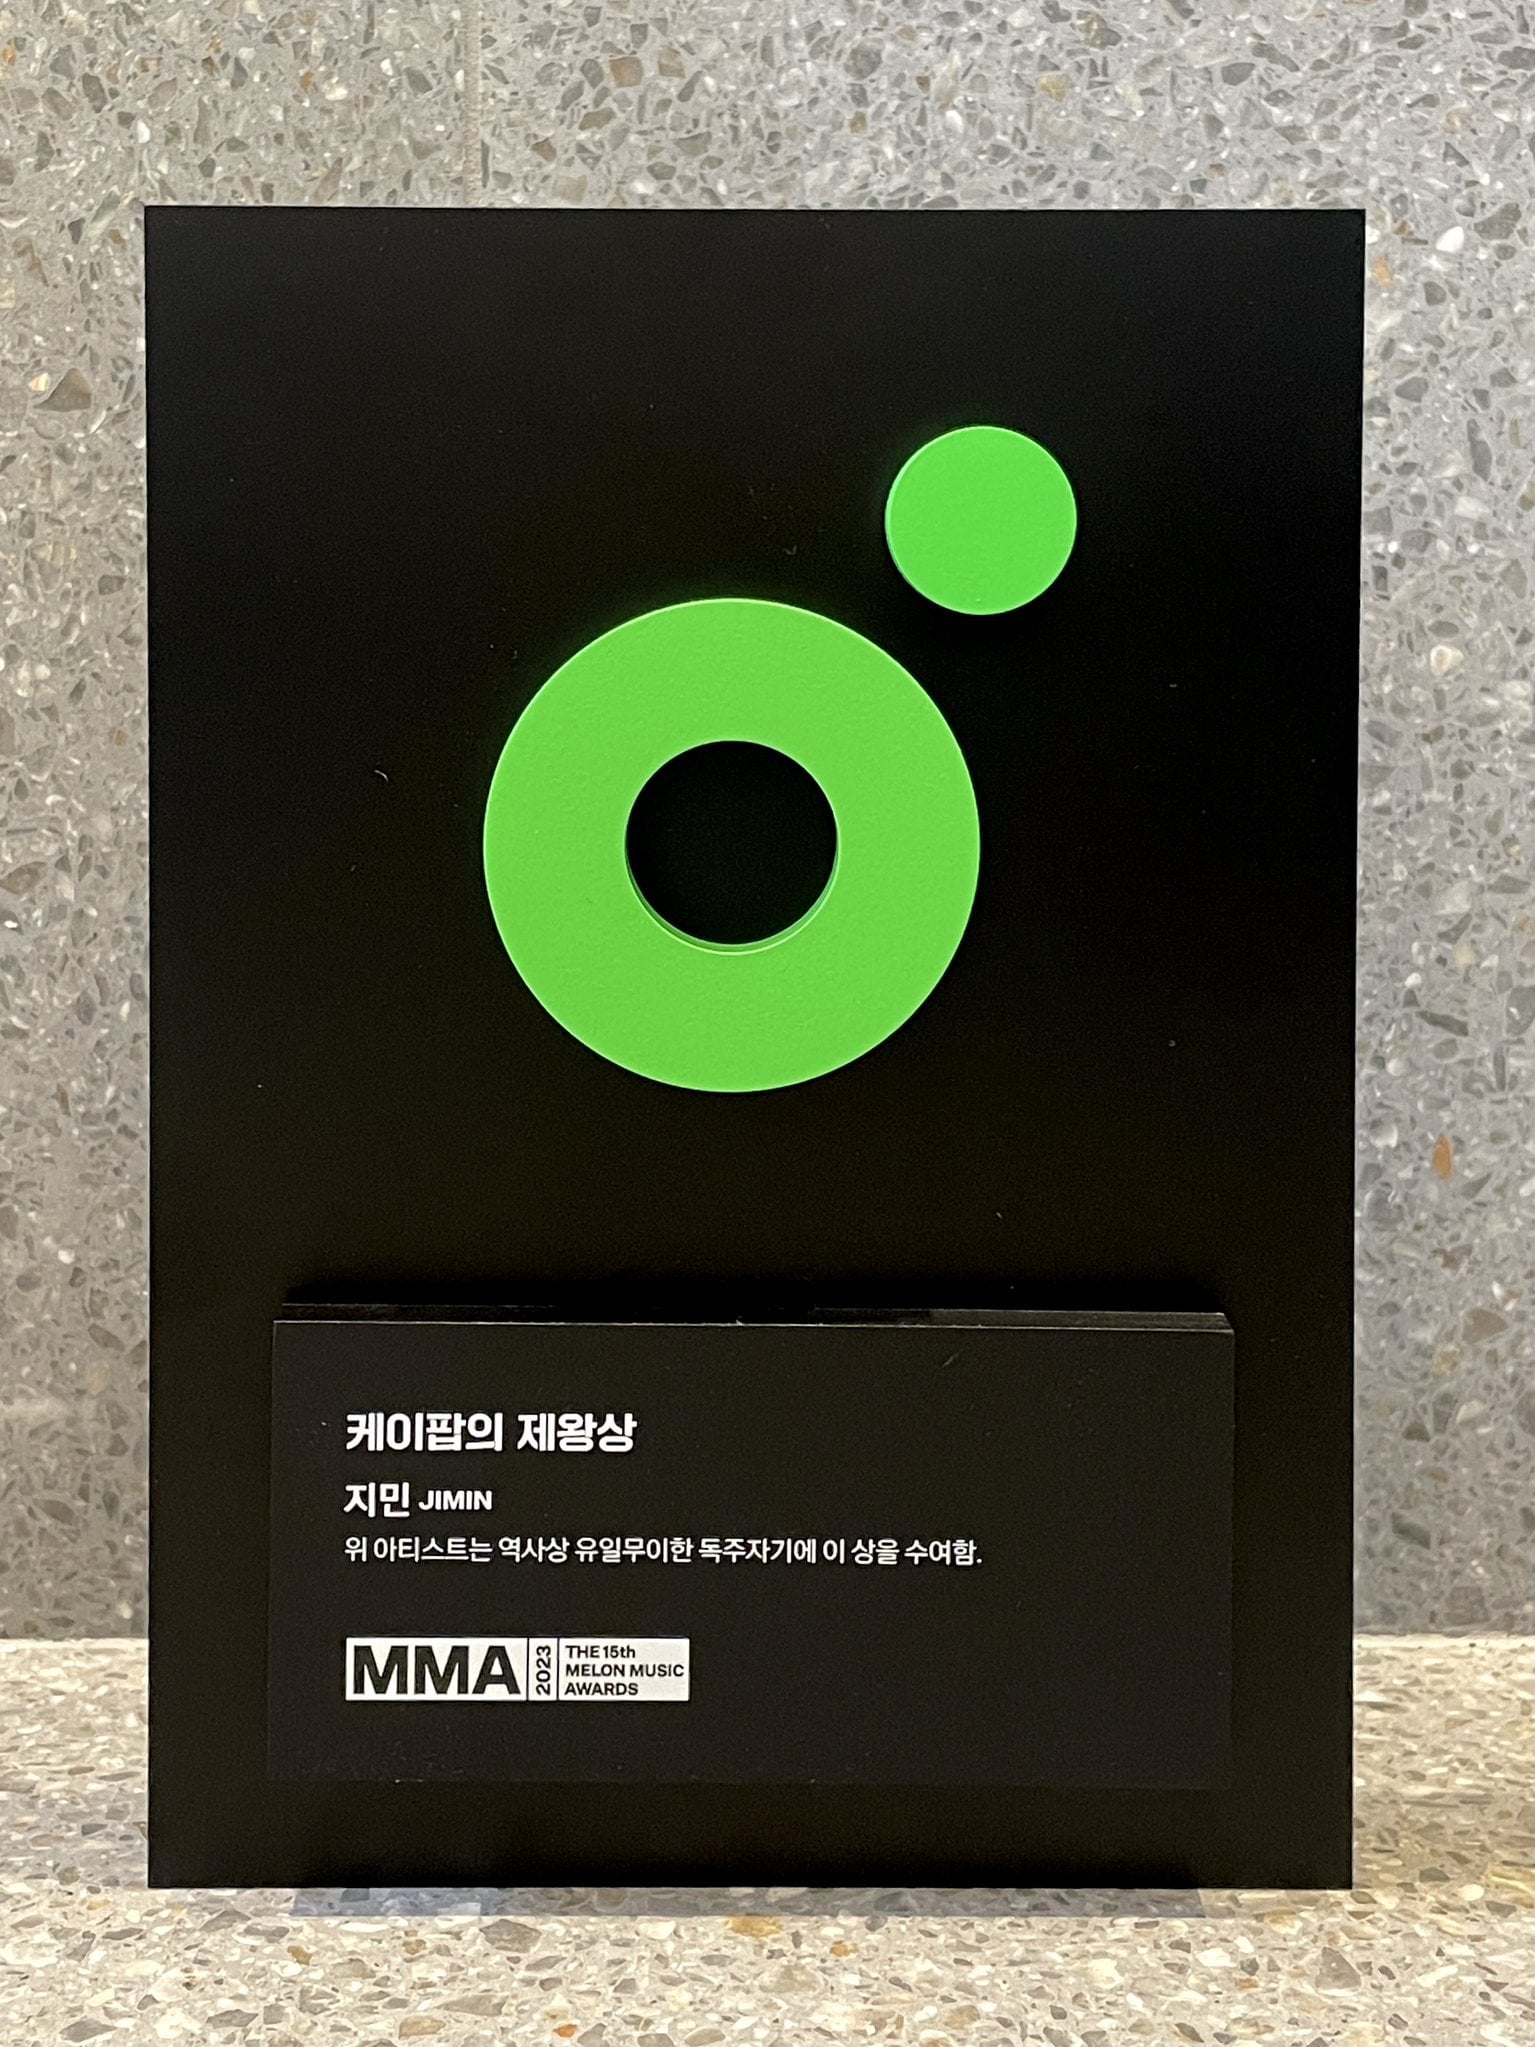 231125 Melon on Twitter: Melon Music Awards Won By BTS Members